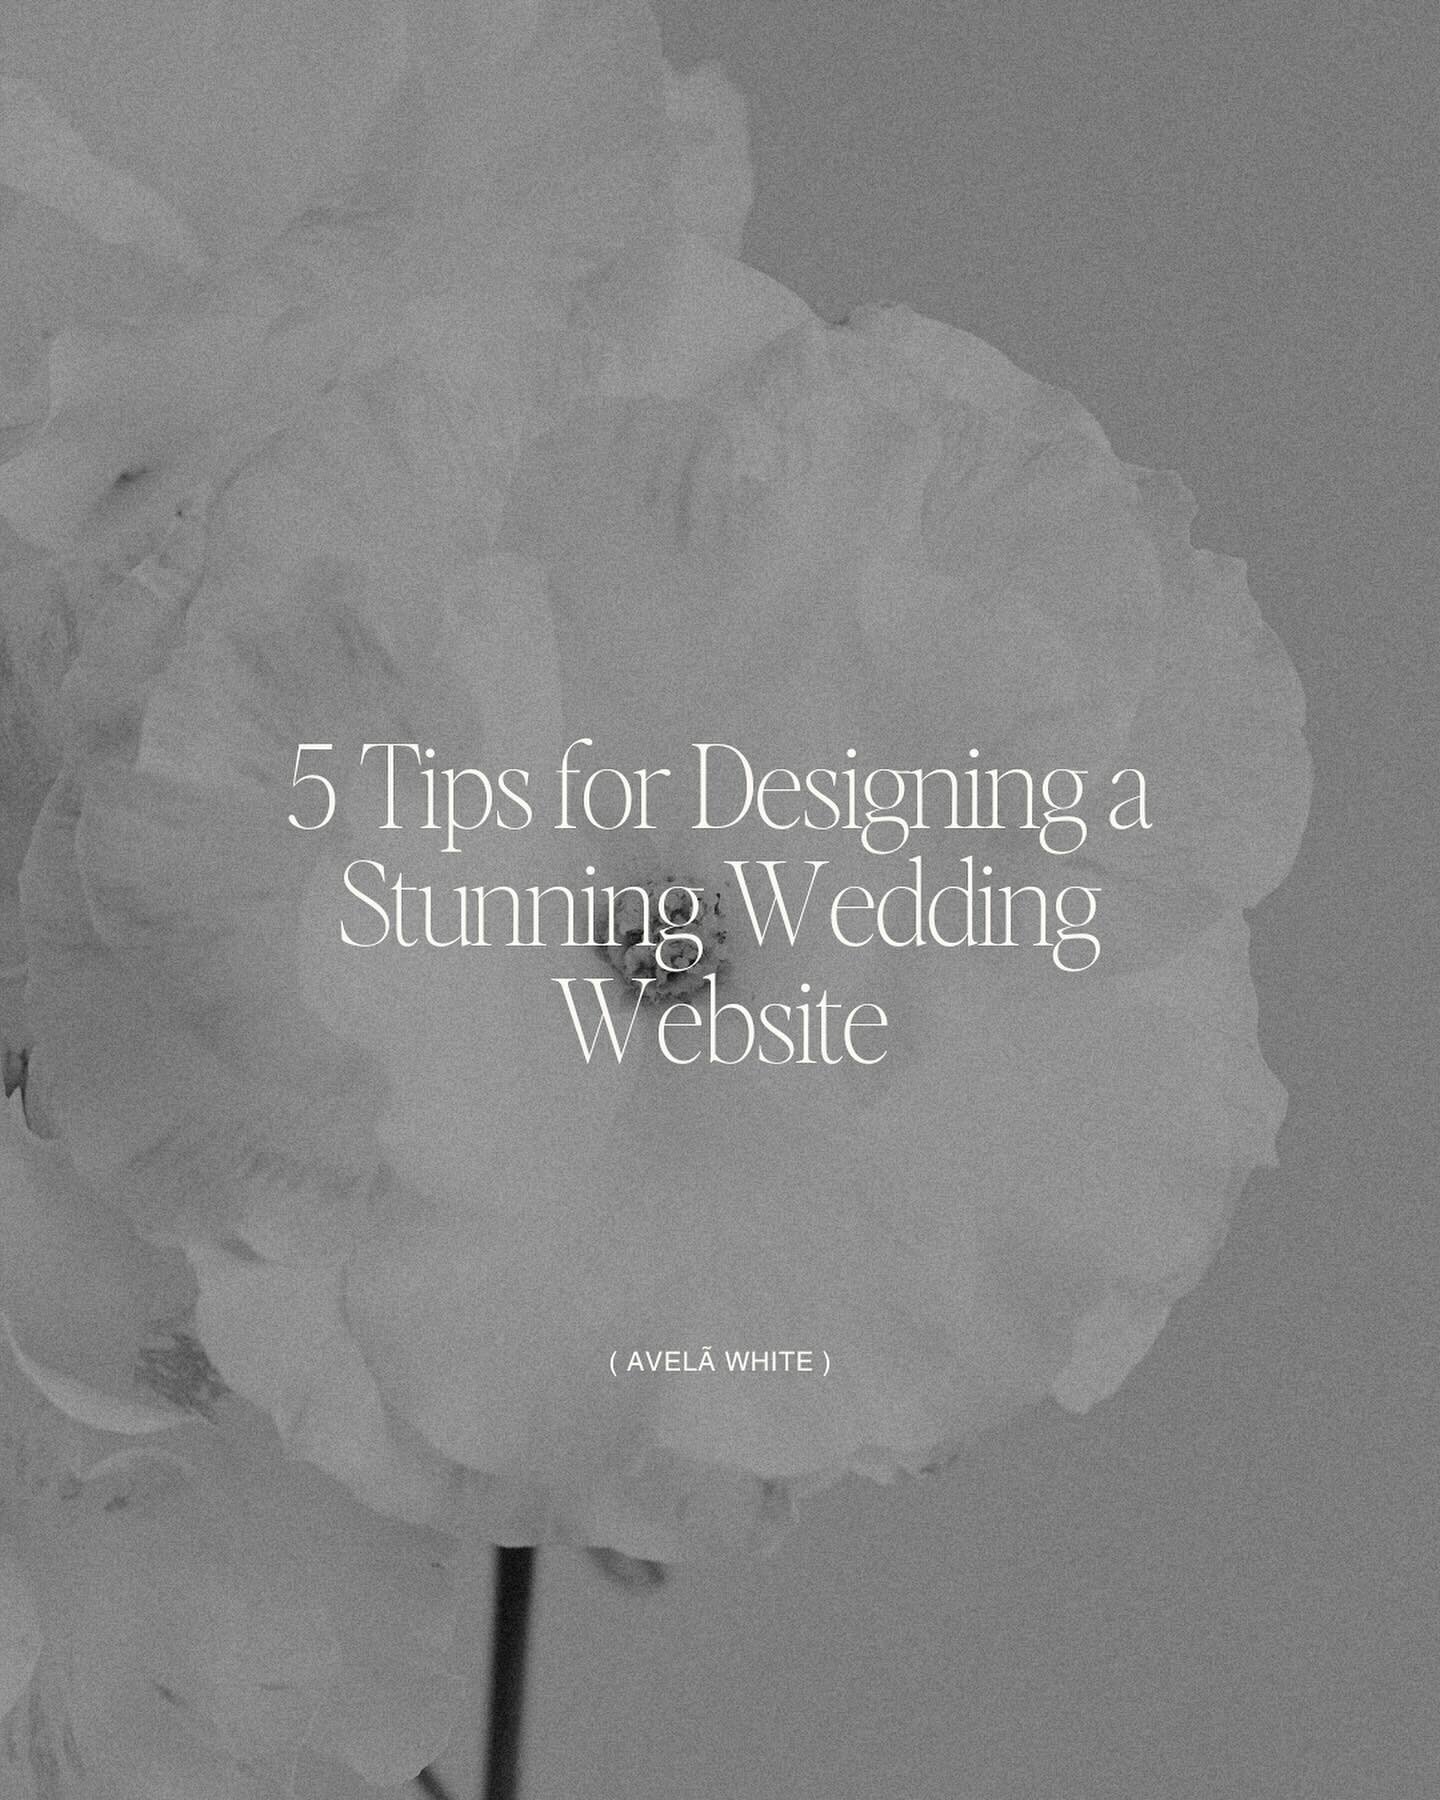 ✨ 5 Tips for Designing a Stunning Wedding Website

In today&rsquo;s modern world, your wedding website is more than just an informational hub&mdash;it&rsquo;s a reflection of your love story, style, and attention to detail. It is the first glimpse yo